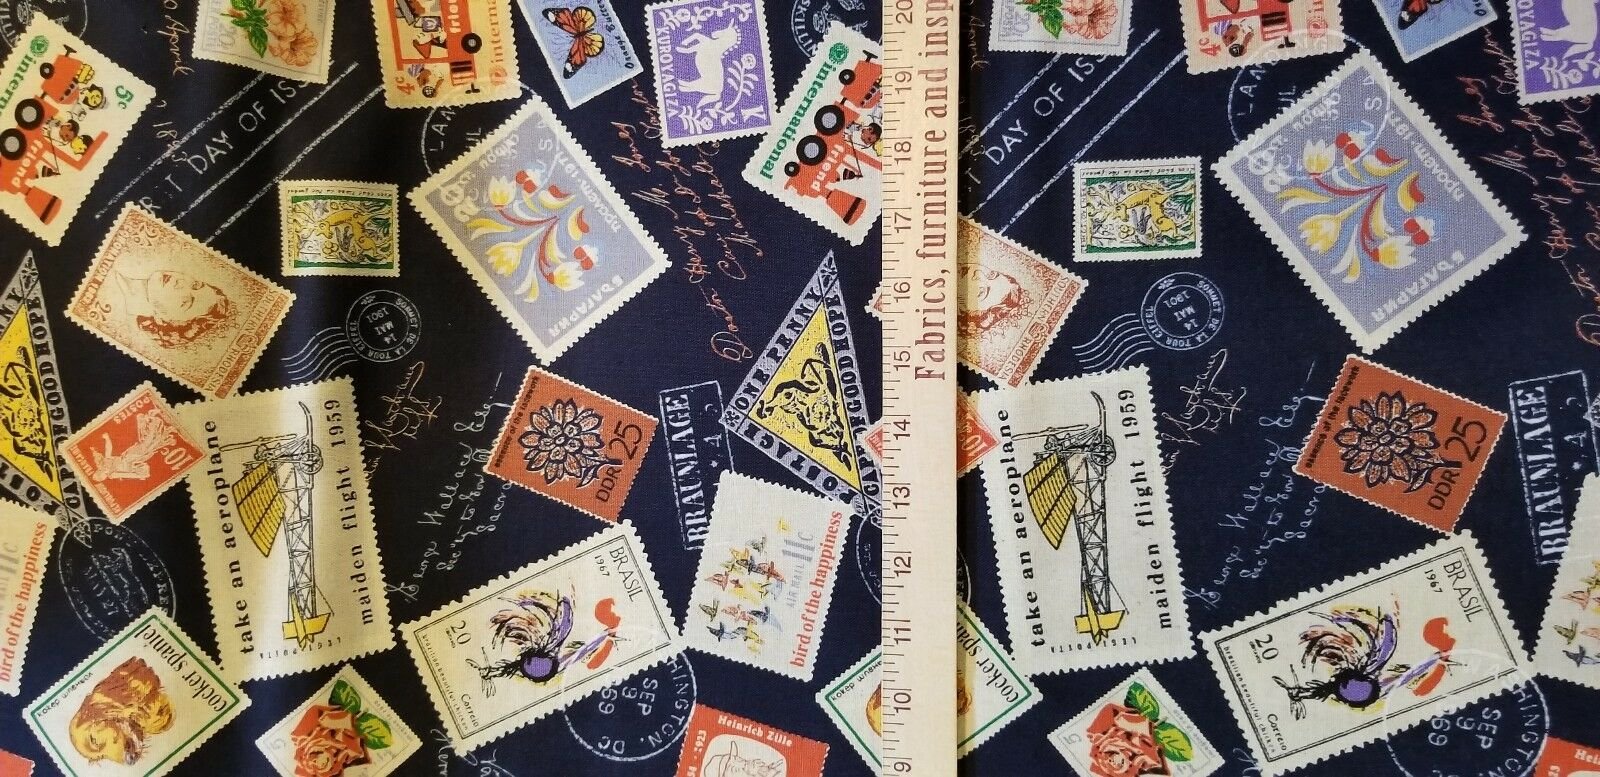 Navy Duck Cloth from Japan with Foreign International Stamps